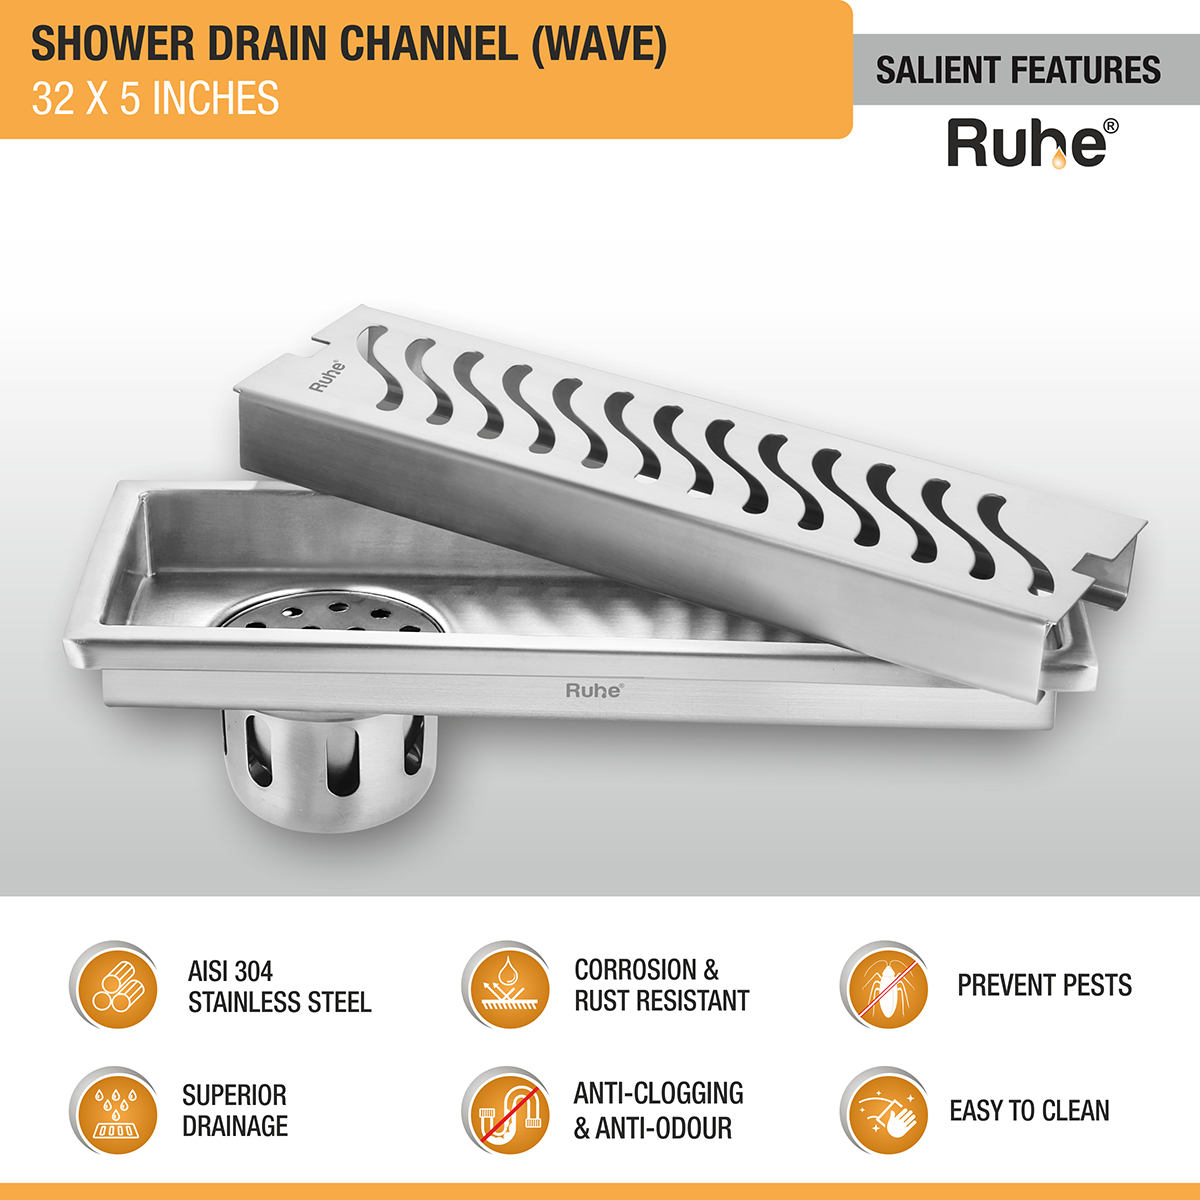 Wave Shower Drain Channel (32 X 5 Inches) with Cockroach Trap (304 Grade) features